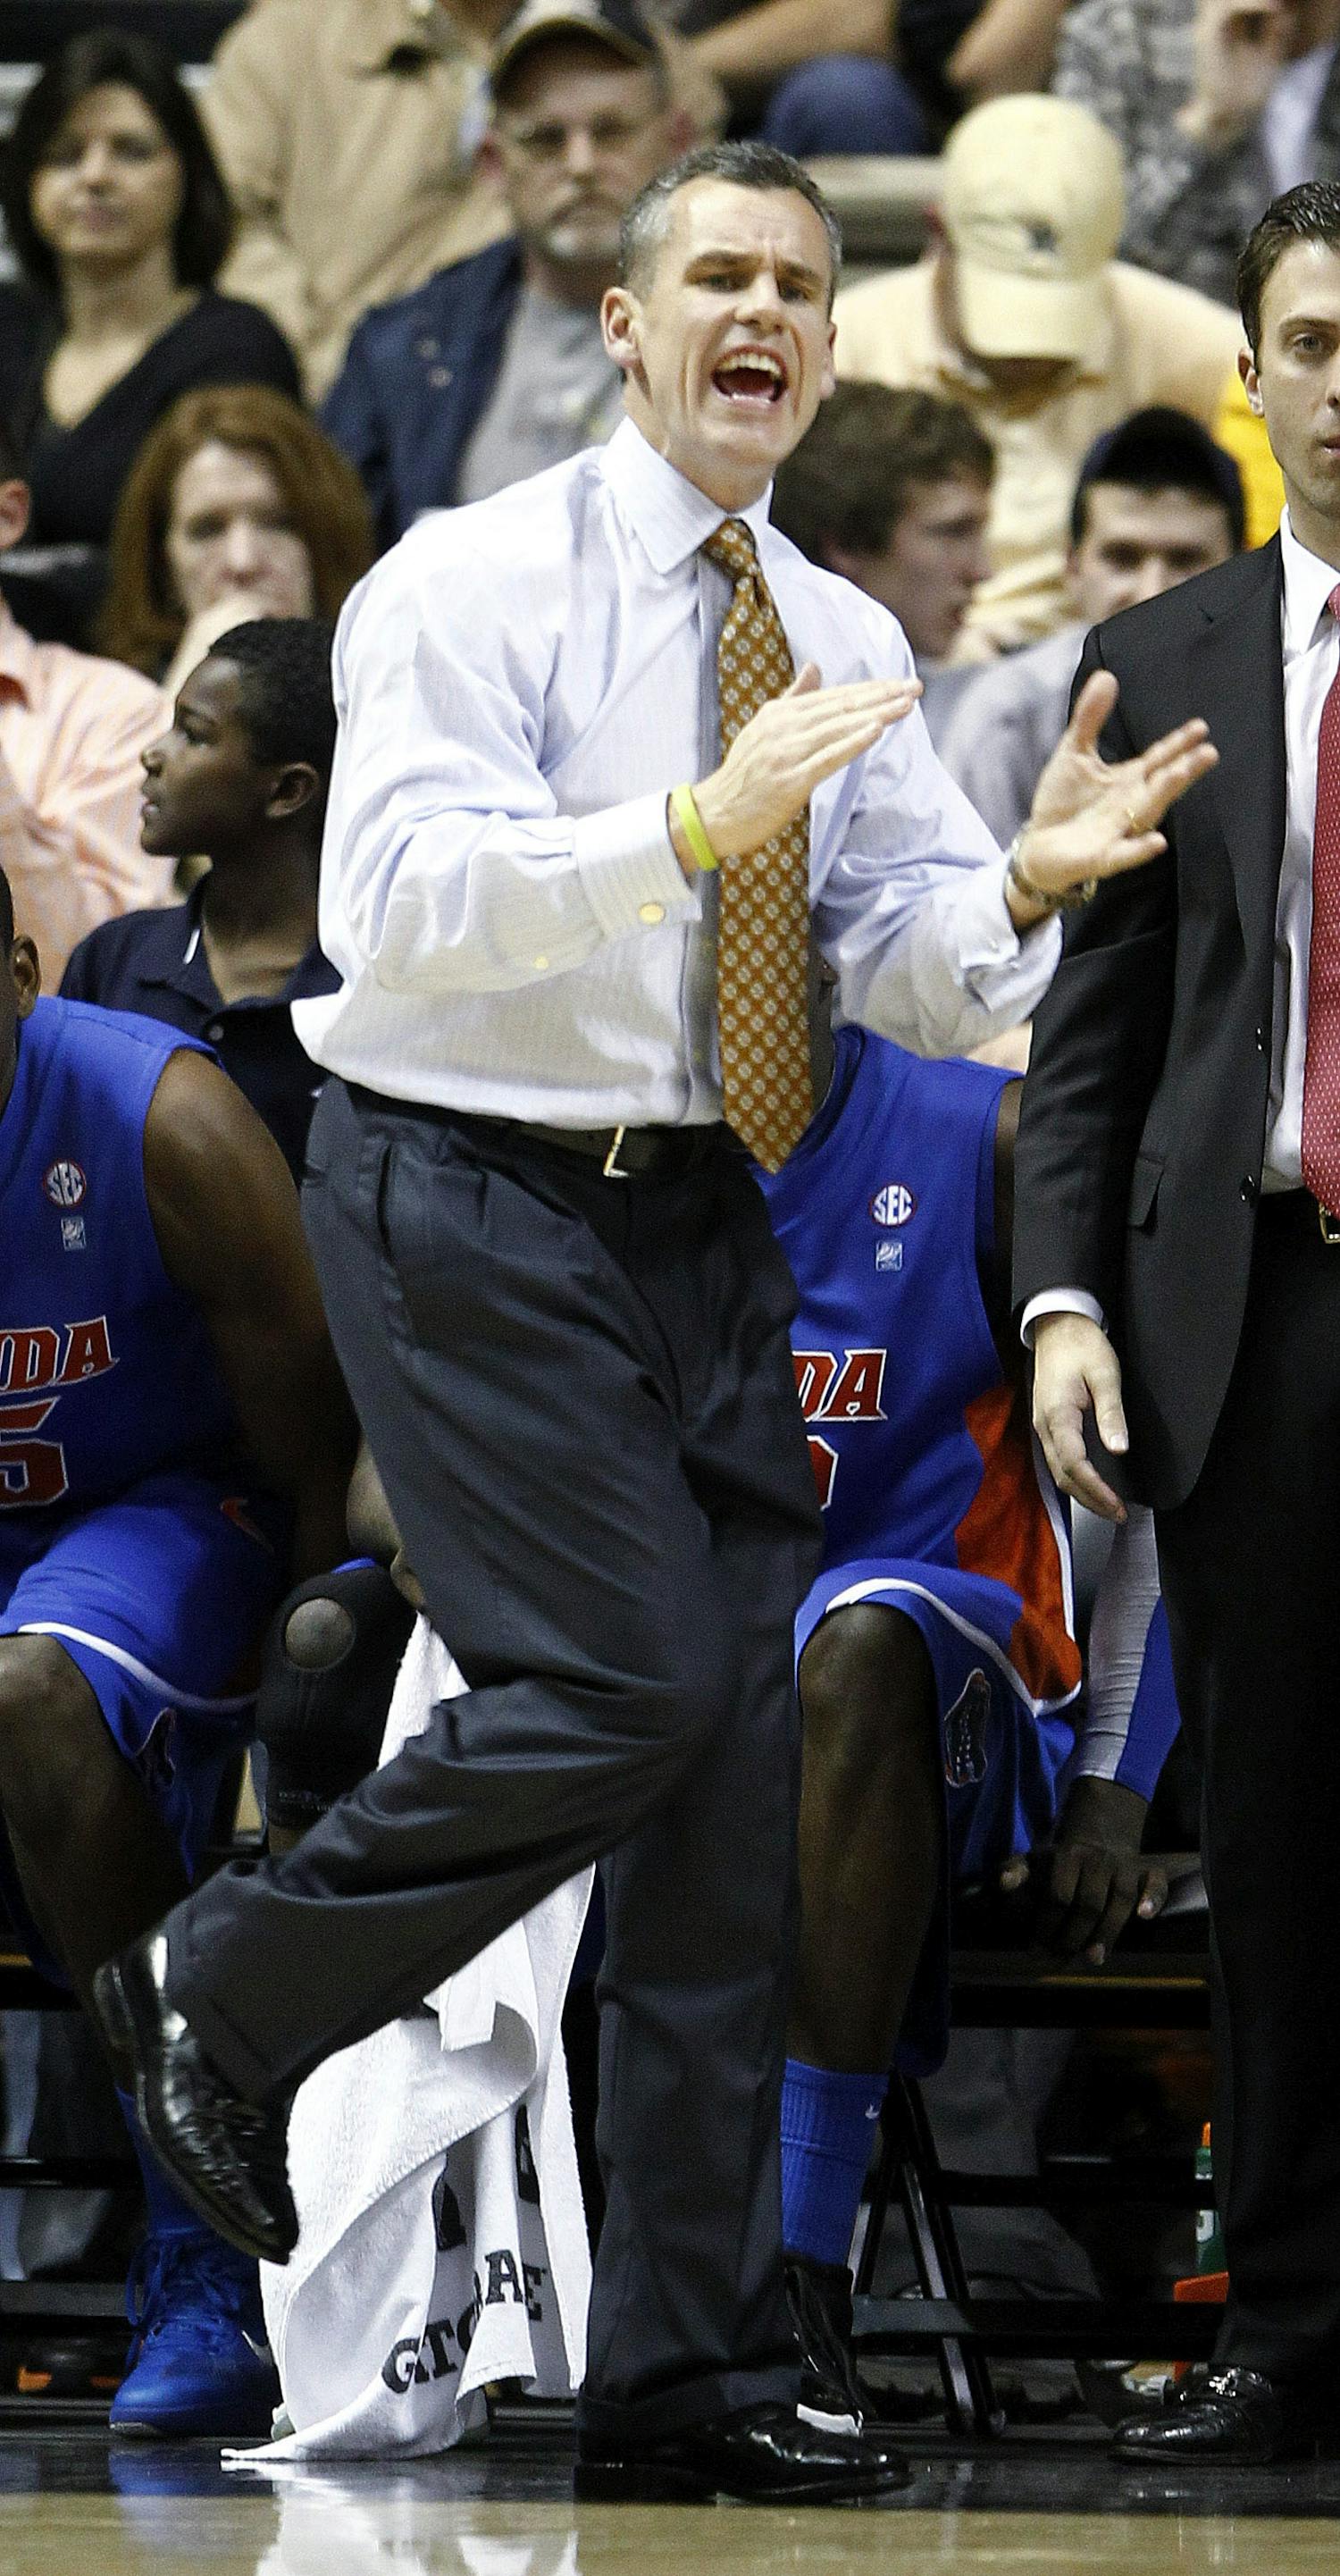 UF coach Billy Donovan yells to his team during the second half of Florida's 86-76 win over Vanderbilt on Saturday in Nashville, Tenn.